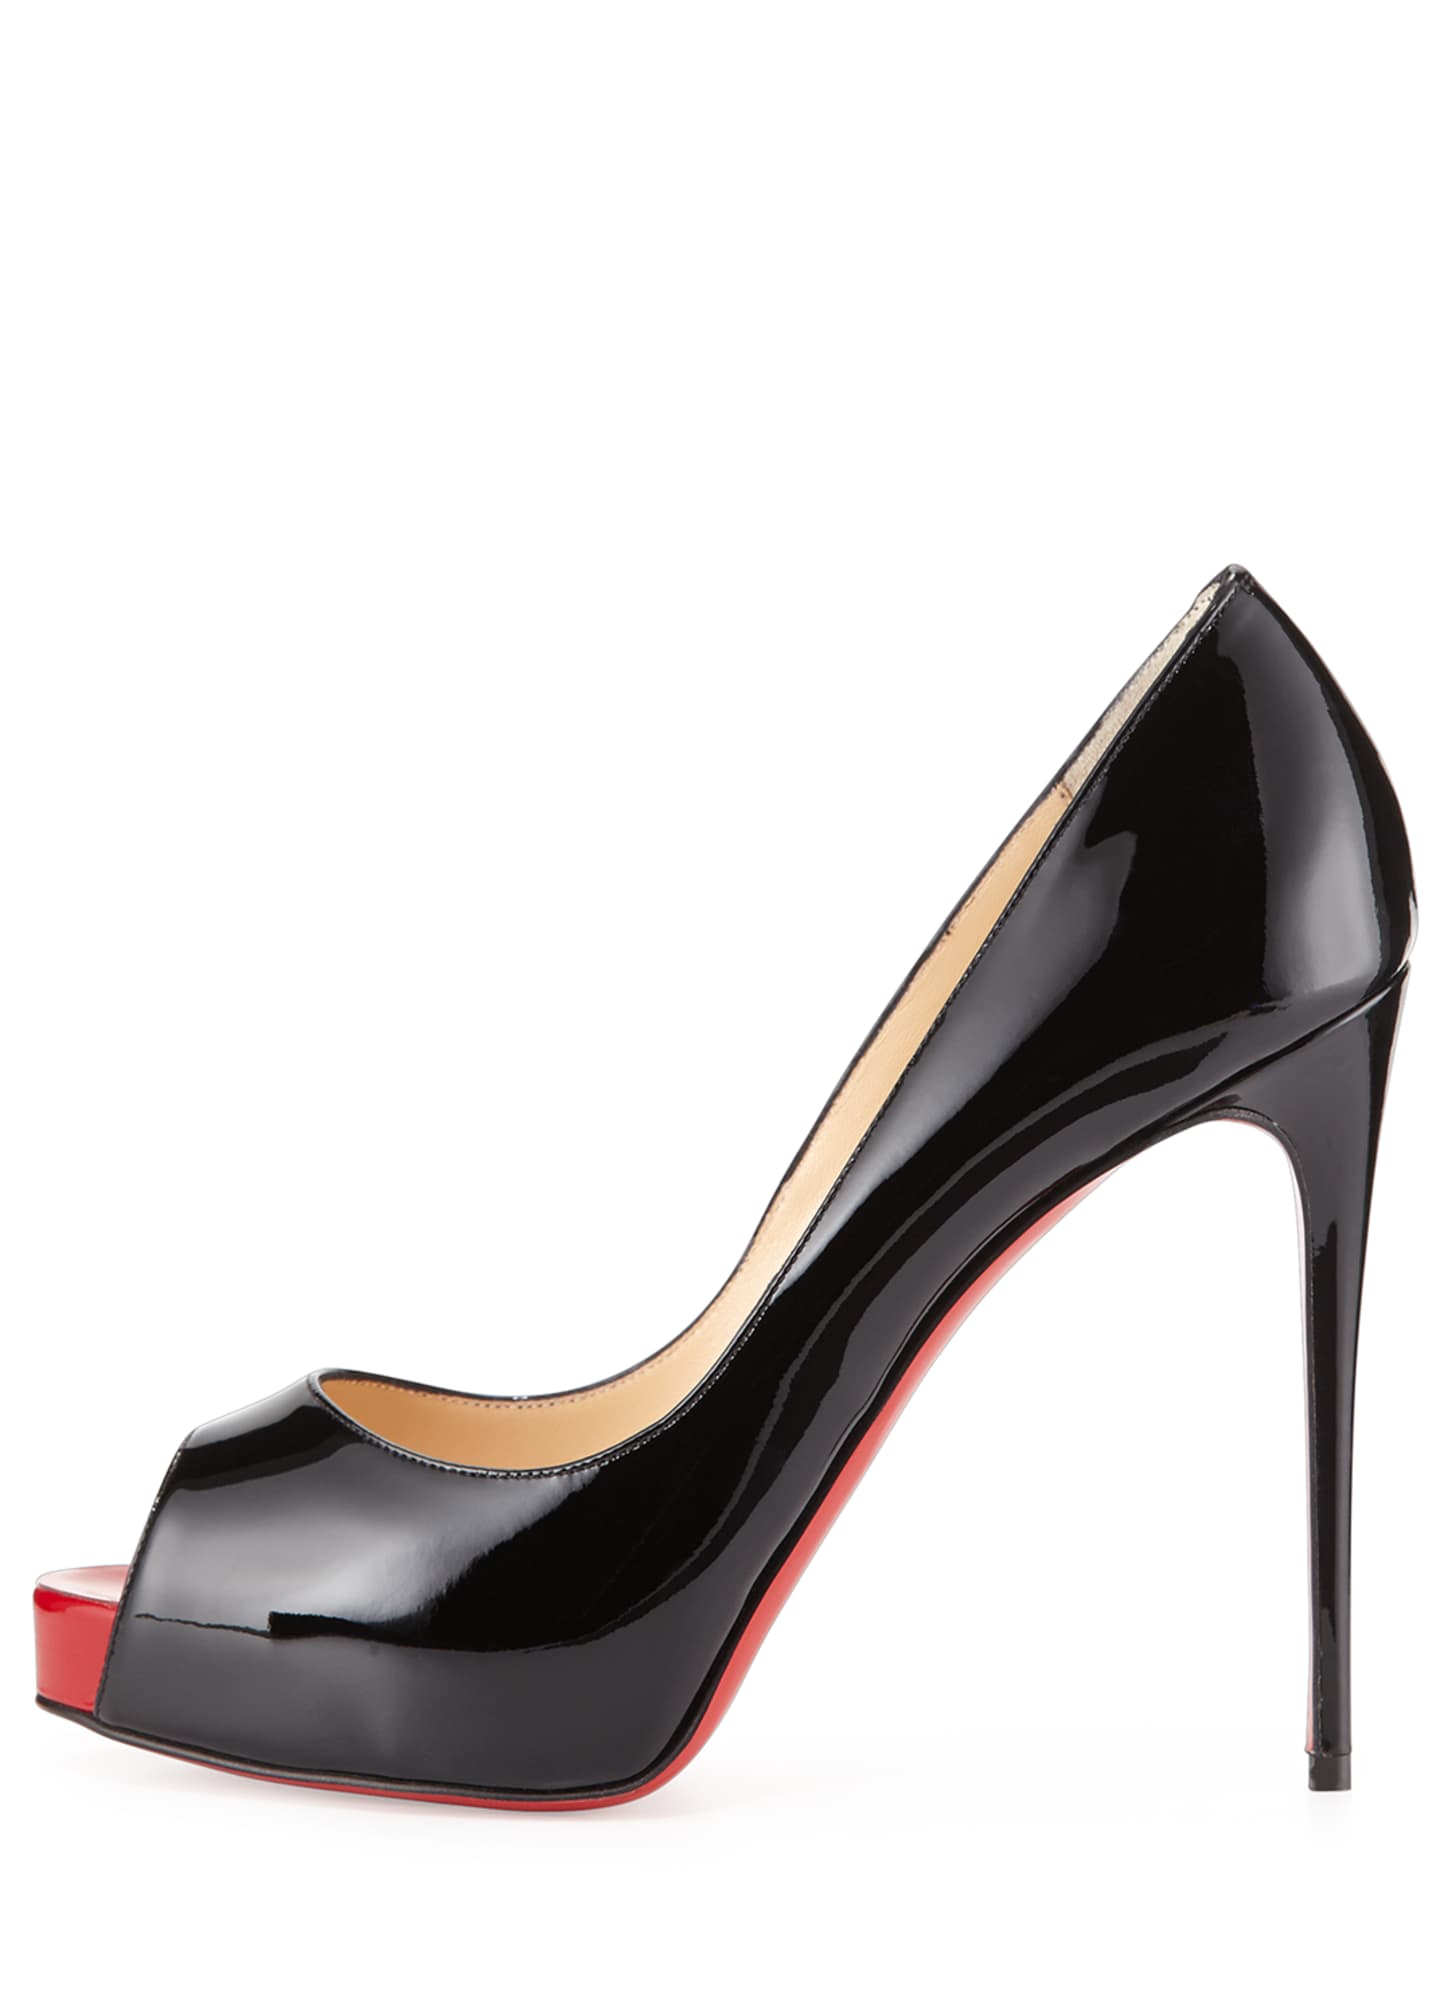 Christian Louboutin New Prive Patent Red Sole Pump - Bergdorf